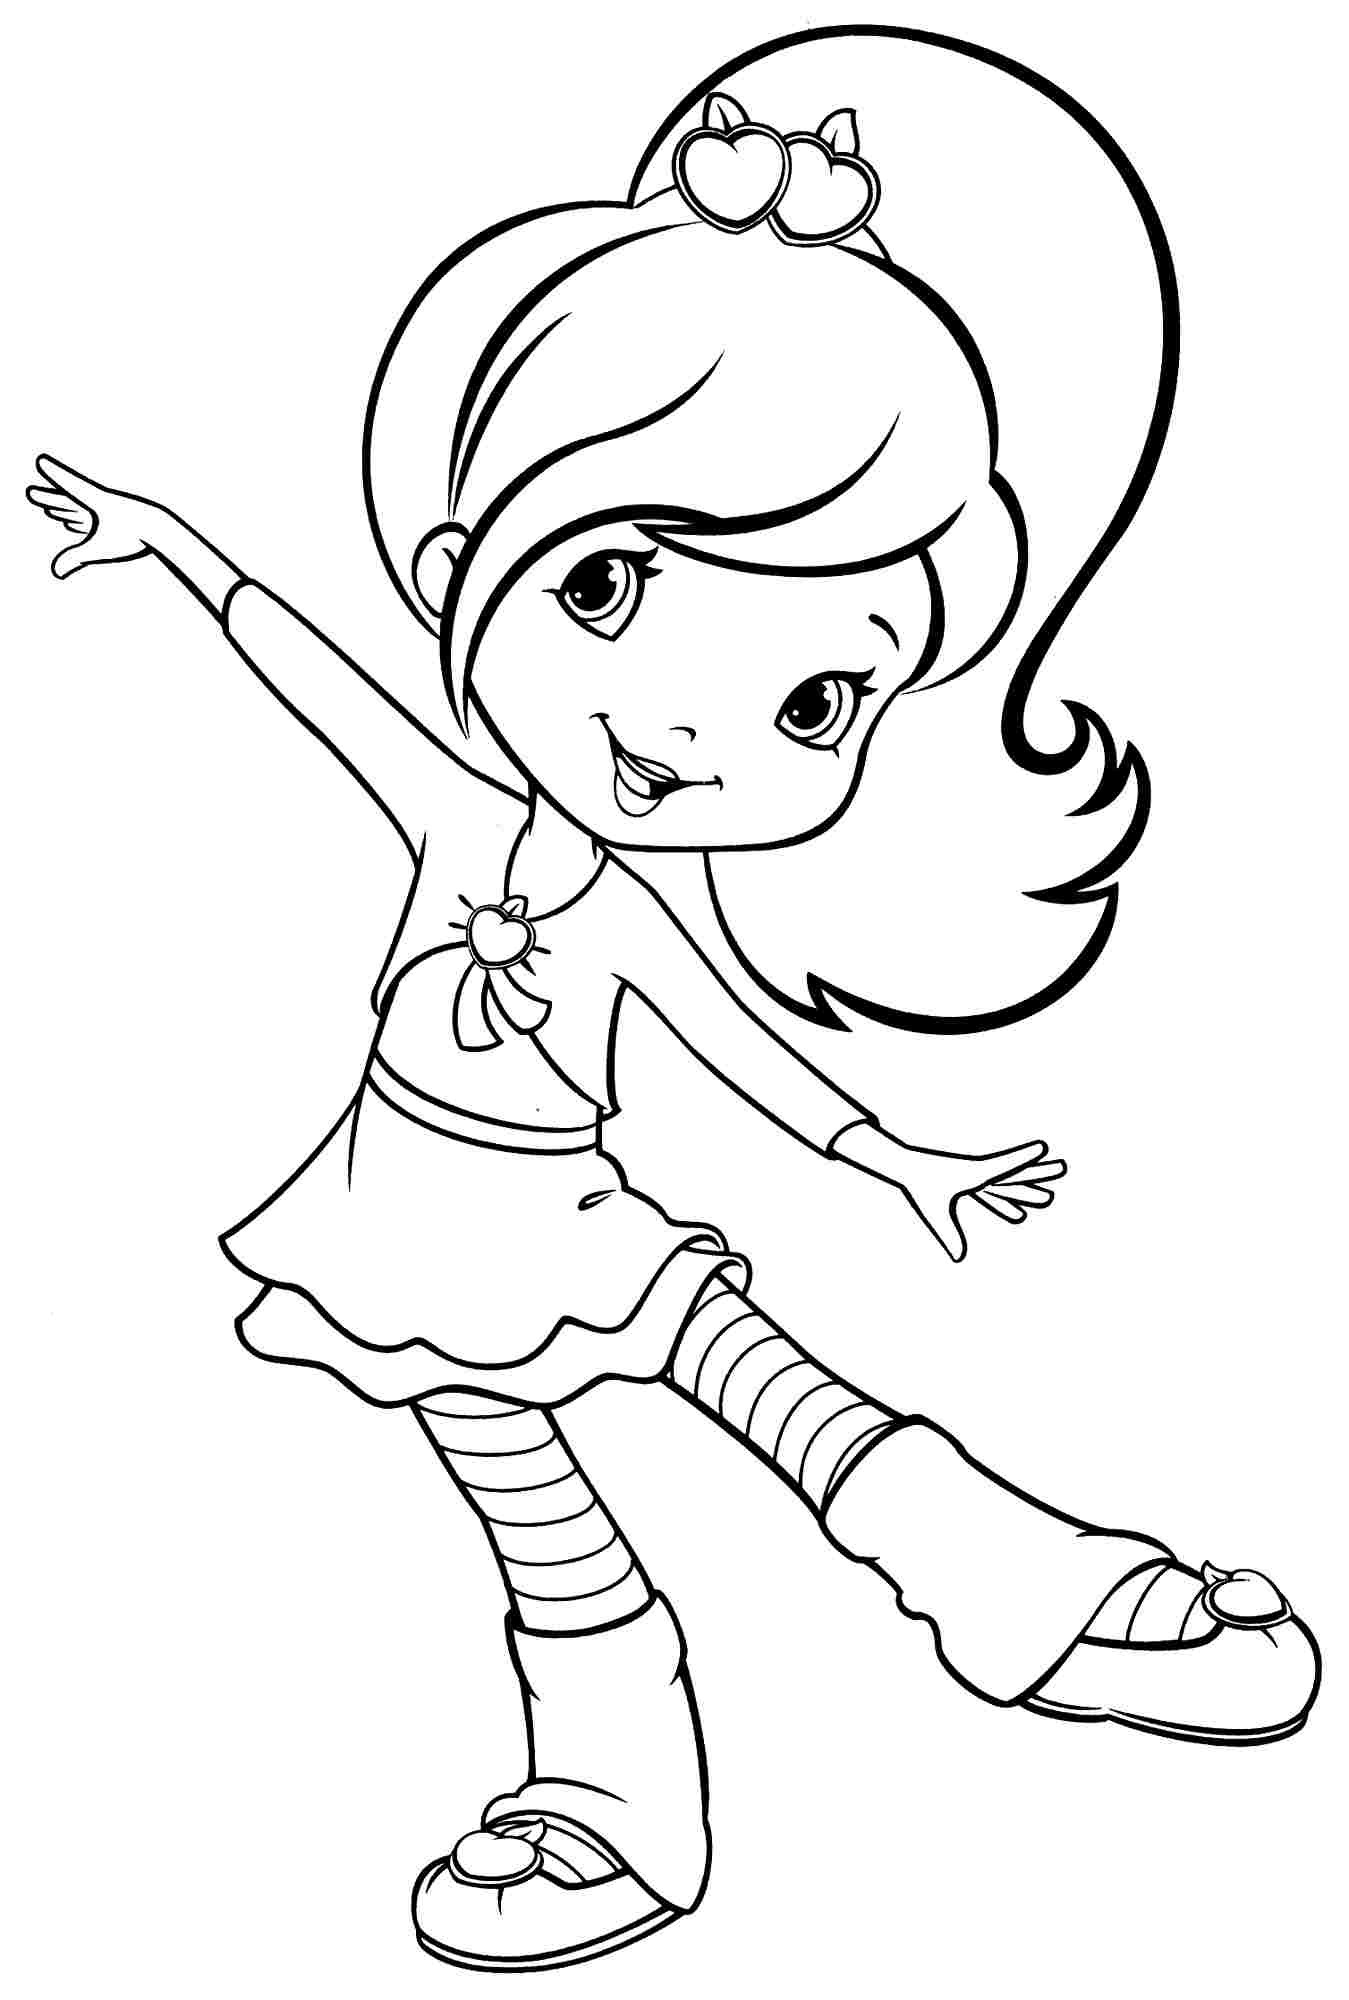 Coloring Book Pages For Girls
 Coloring Pages for Girls Best Coloring Pages For Kids